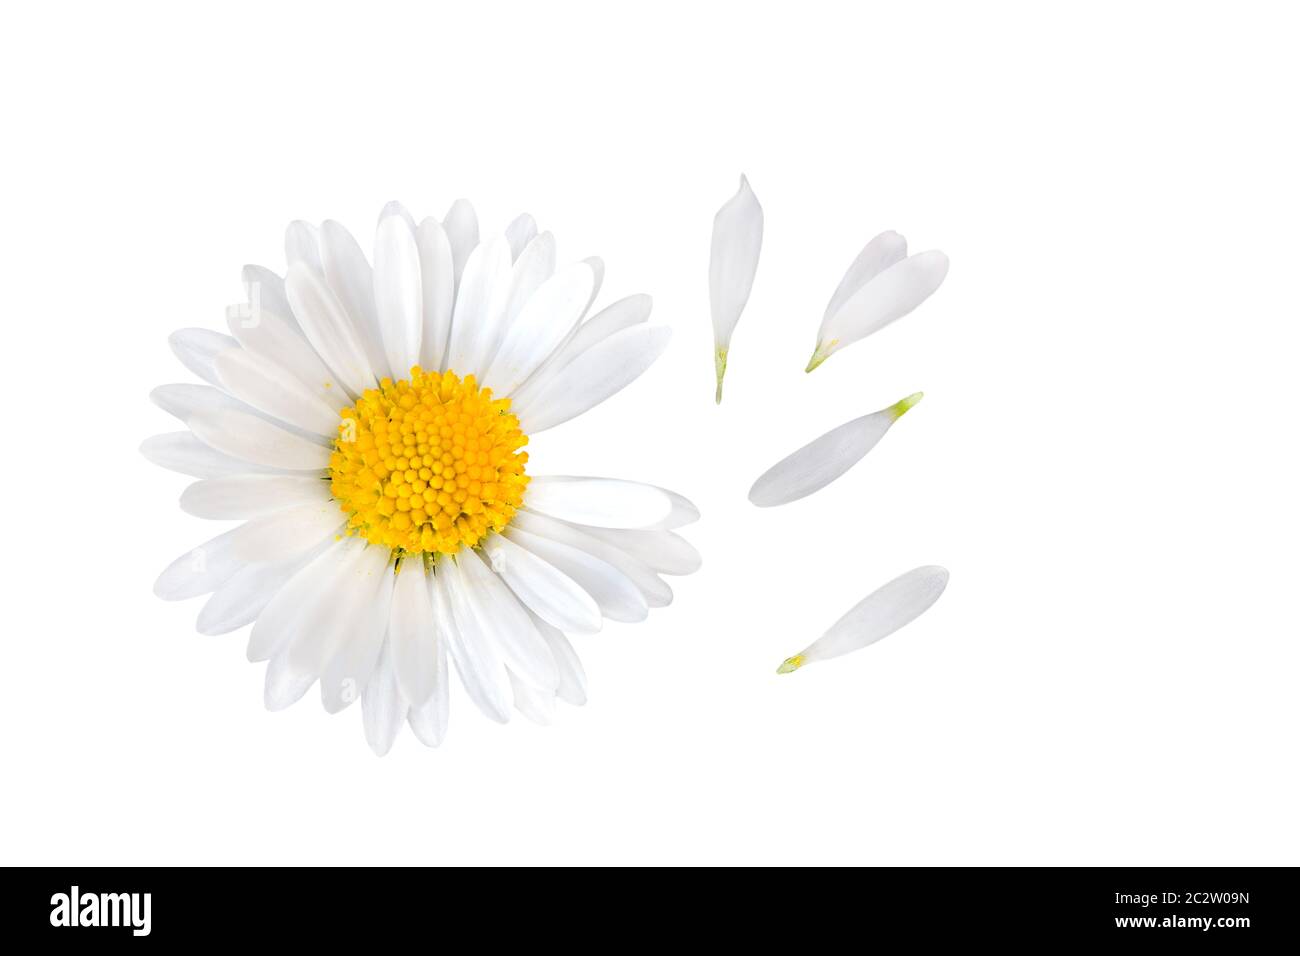 Bellis perennis flower with separate petals Stock Photo